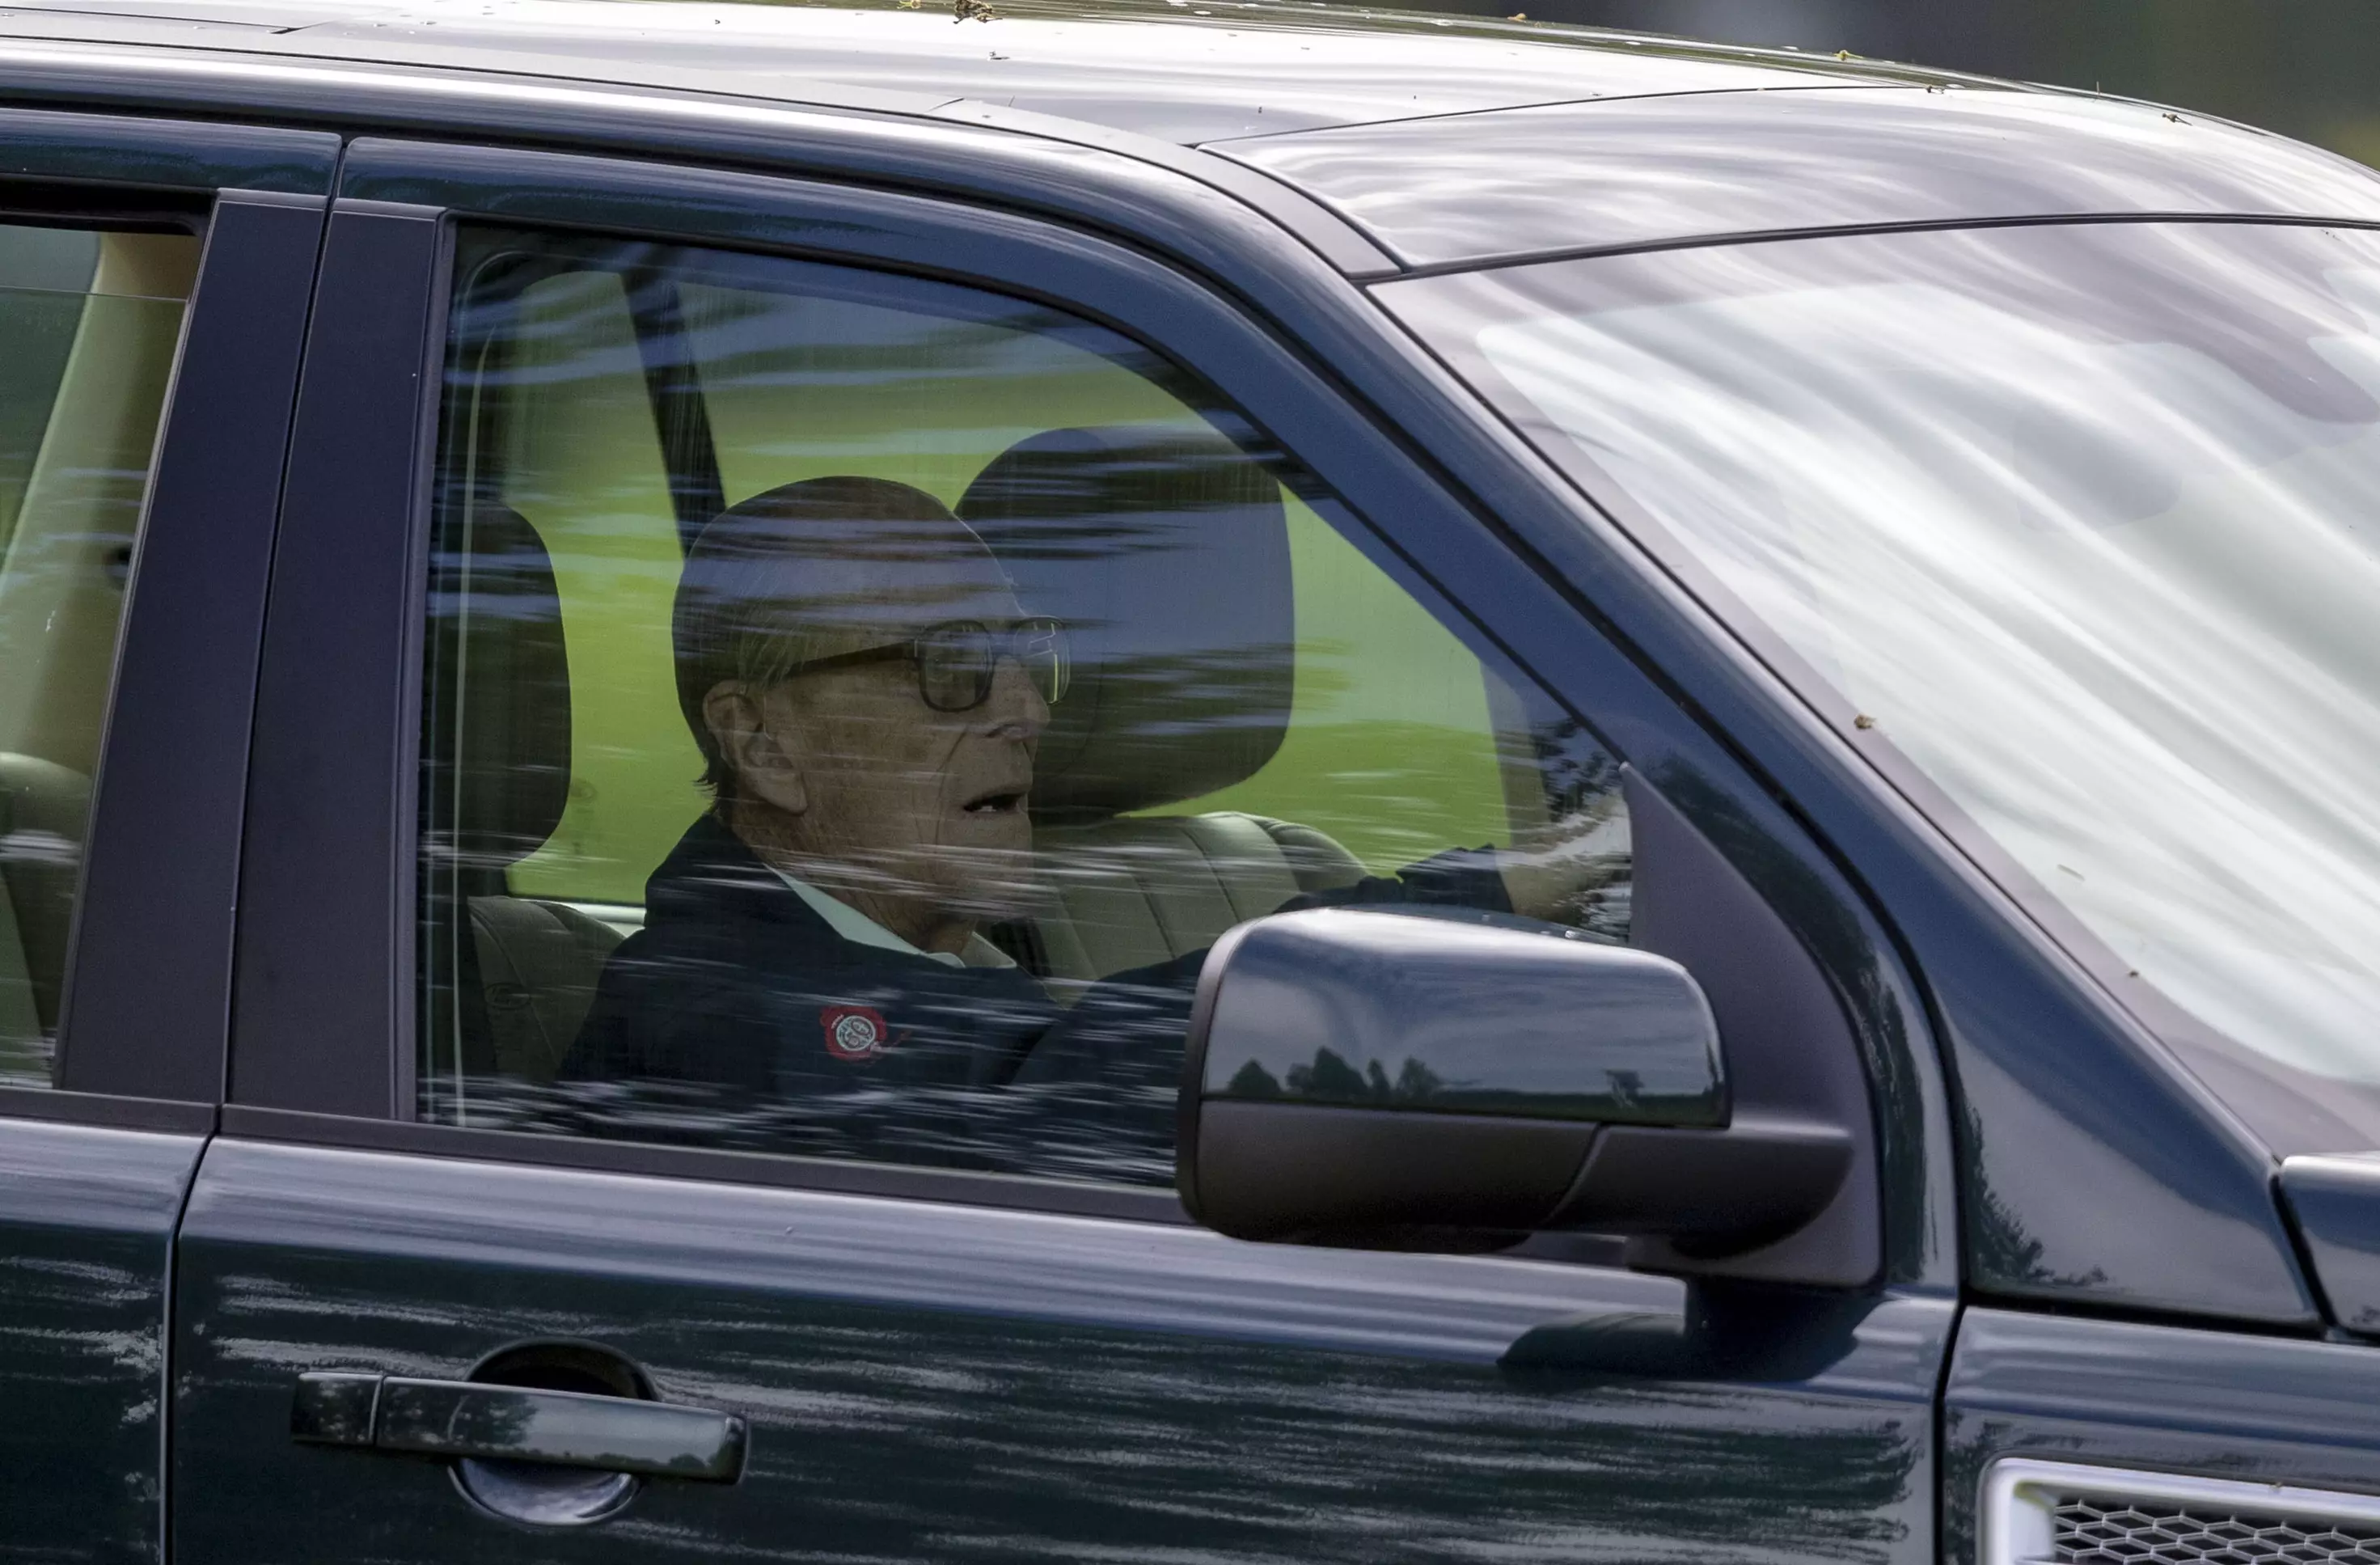 Prince Philip is already back on the road.